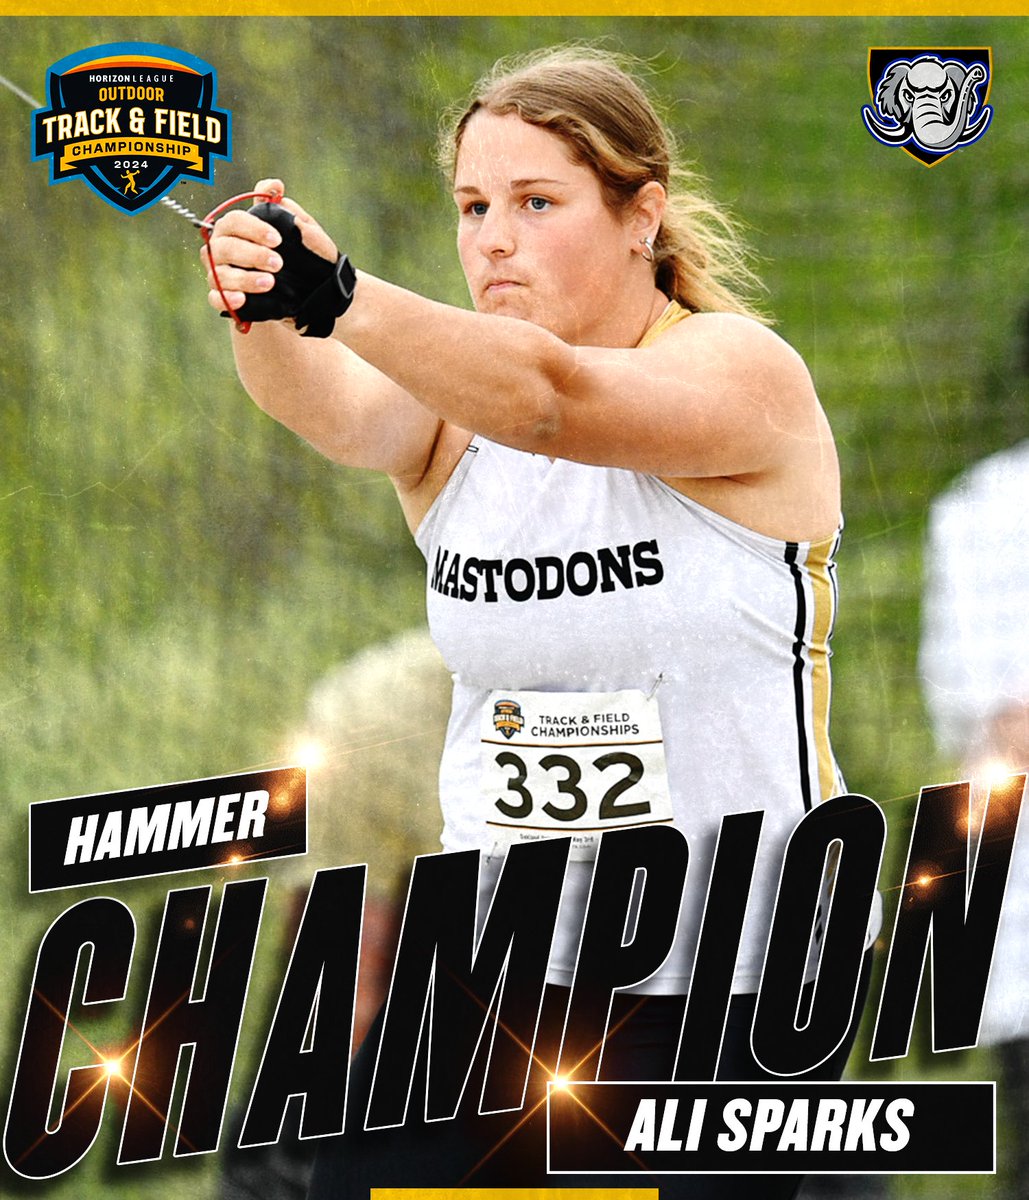 Ali Sparks! Hammer Champion! 52.31 meters

#FeelTheRumble #HLTF